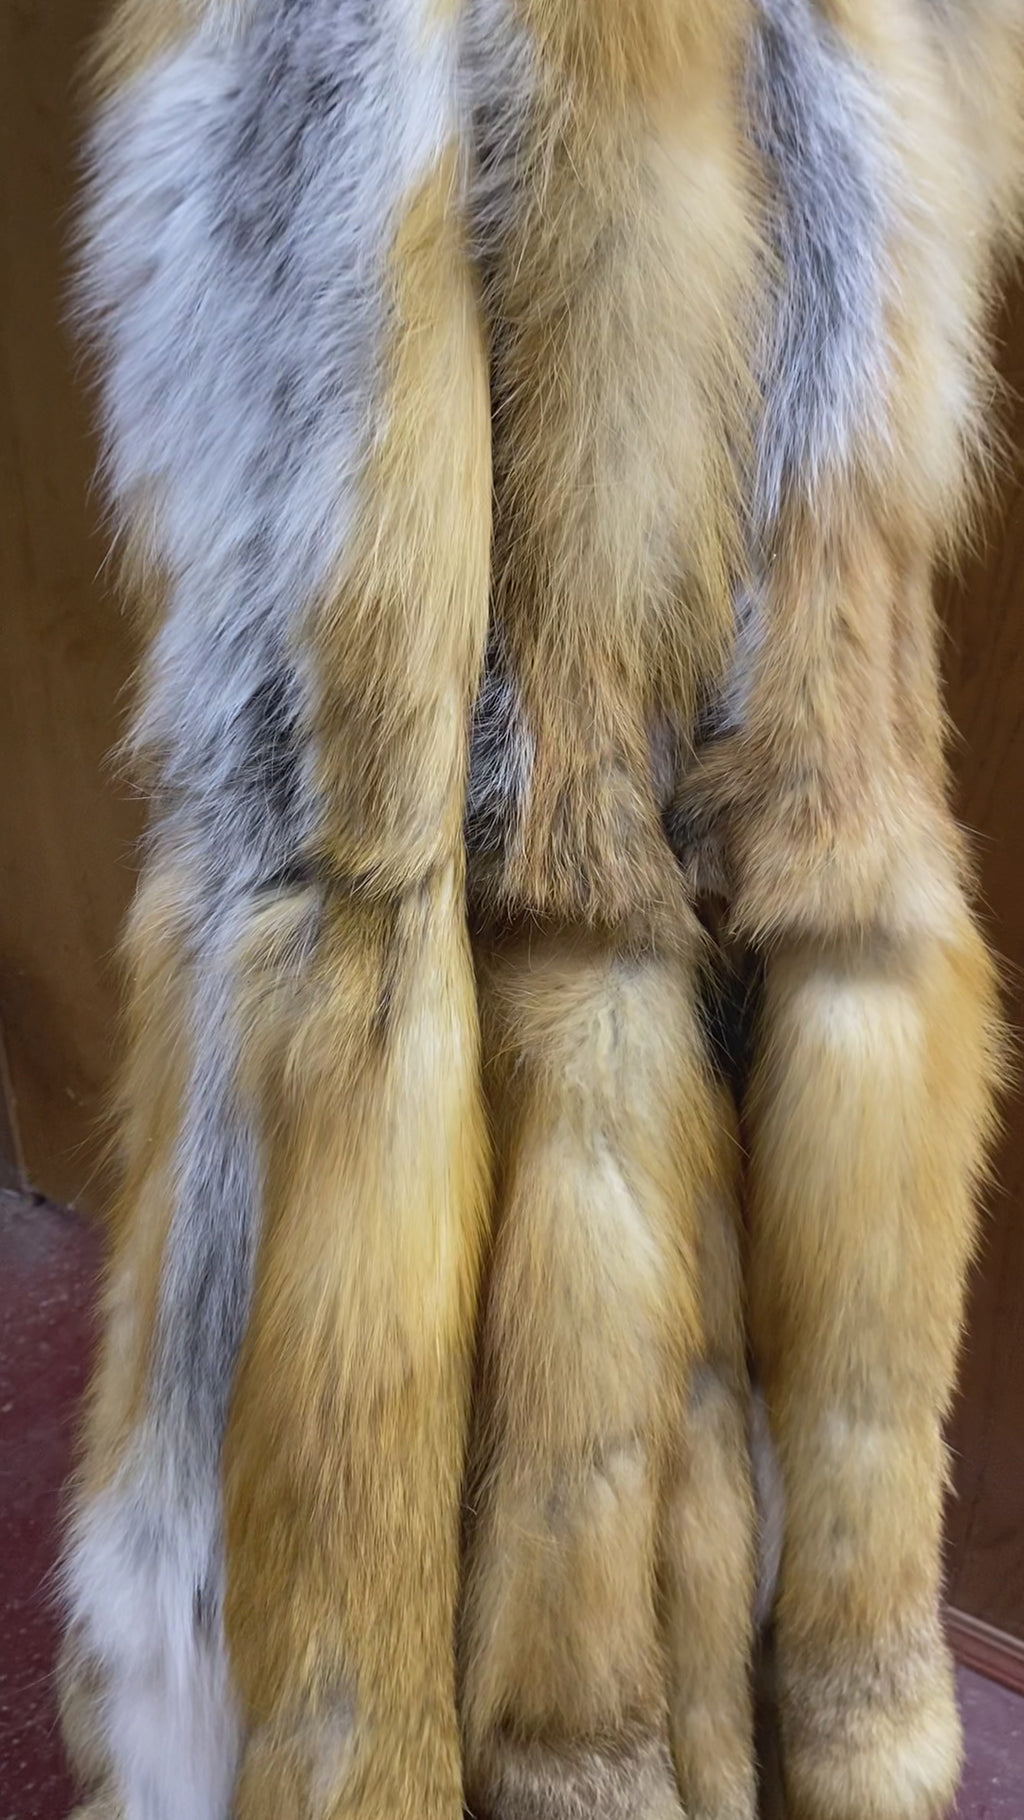  Genuine Natural Tanned Red Fox Pelts Hides Fur Real Fox Skin  Hides for Fly Tying DIY Crafts Fur Coats Trapping Fur Taxidermy Decor 44-49  inch Red Brown